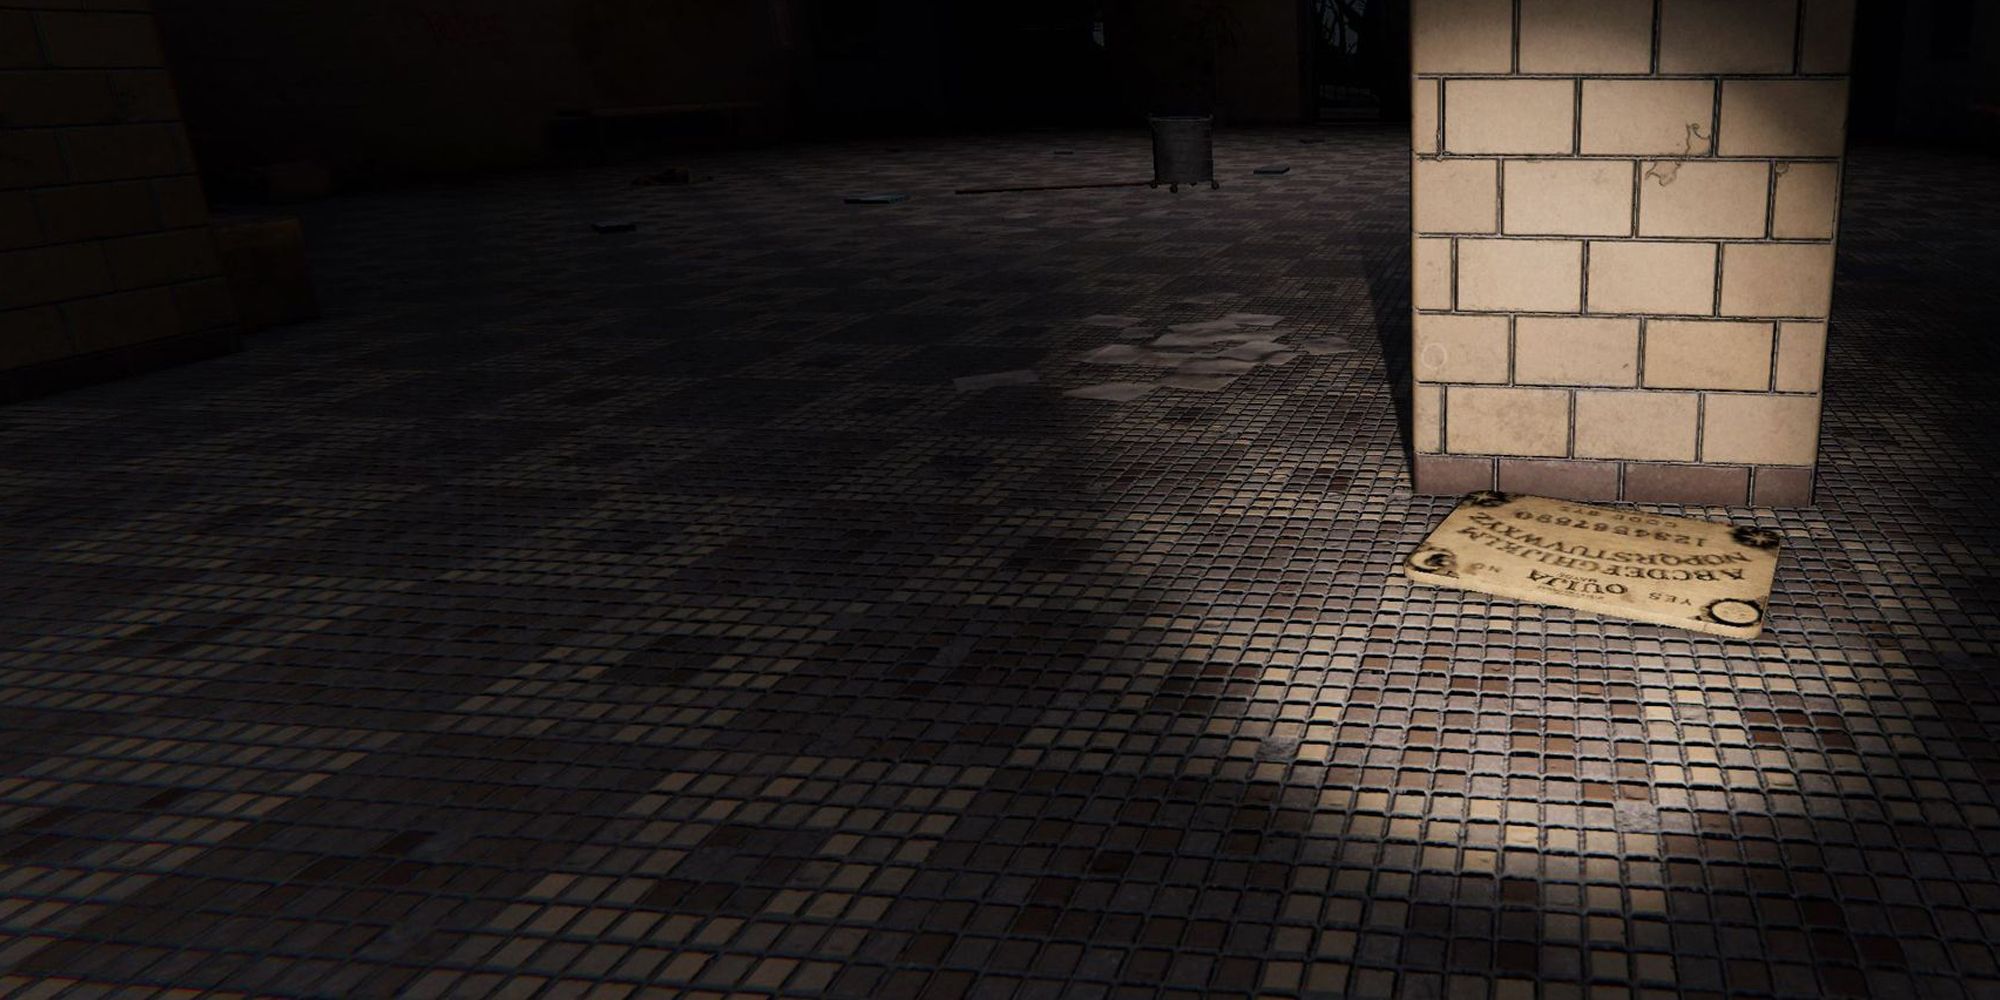 Image depicts a Ouija Board on tiled floor next to a brick pillar in Phasmophobia. This image is from Brownstone High School.